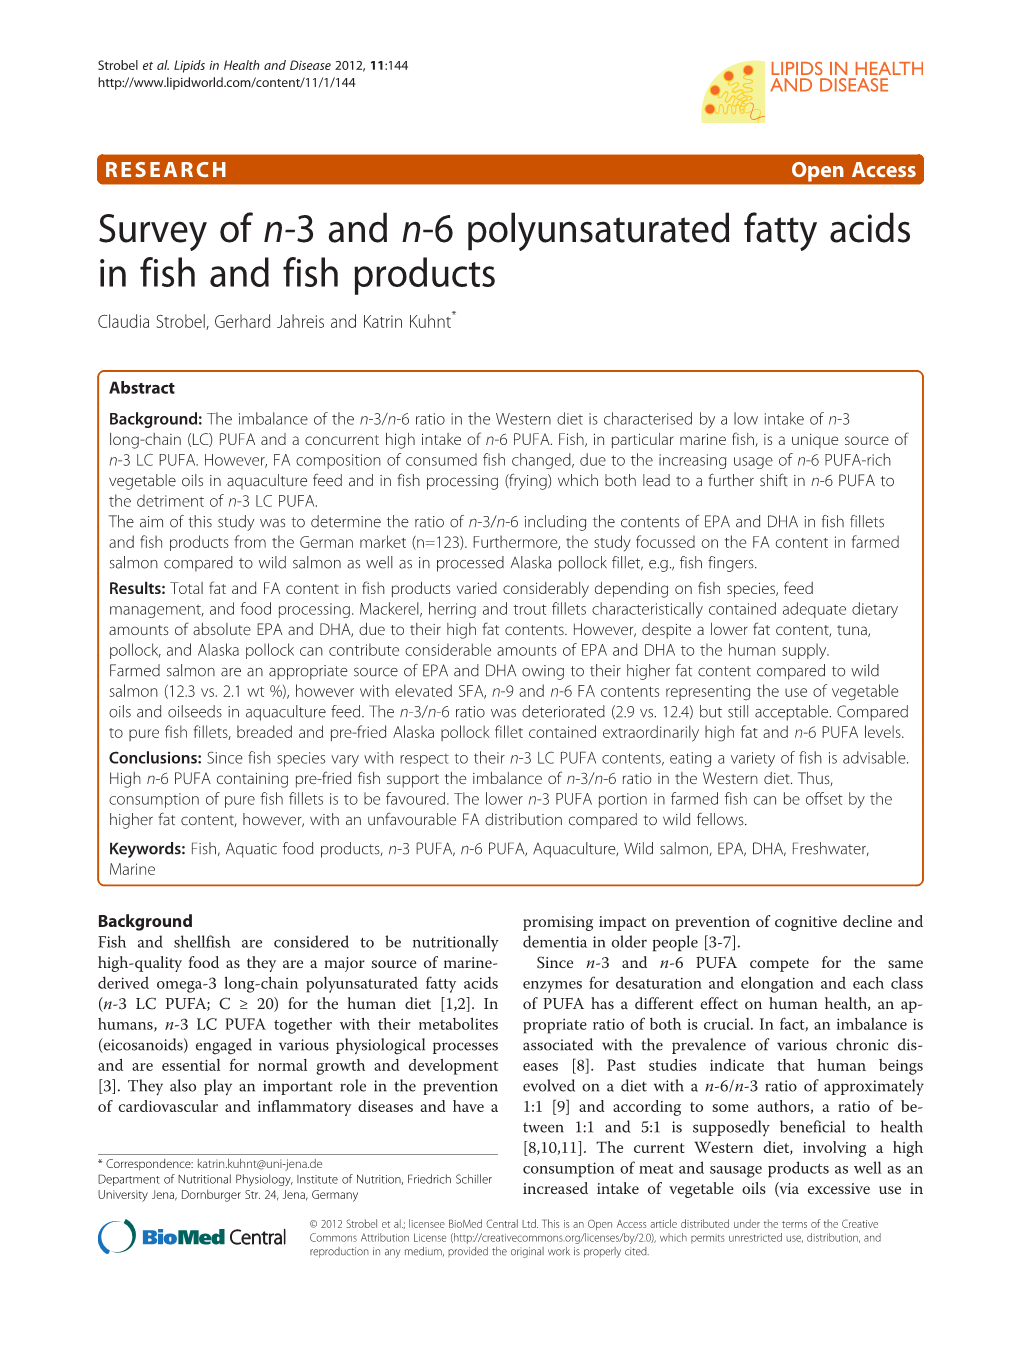 Survey of N-3 and N-6 Polyunsaturated Fatty Acids in Fish and Fish Products Claudia Strobel, Gerhard Jahreis and Katrin Kuhnt*